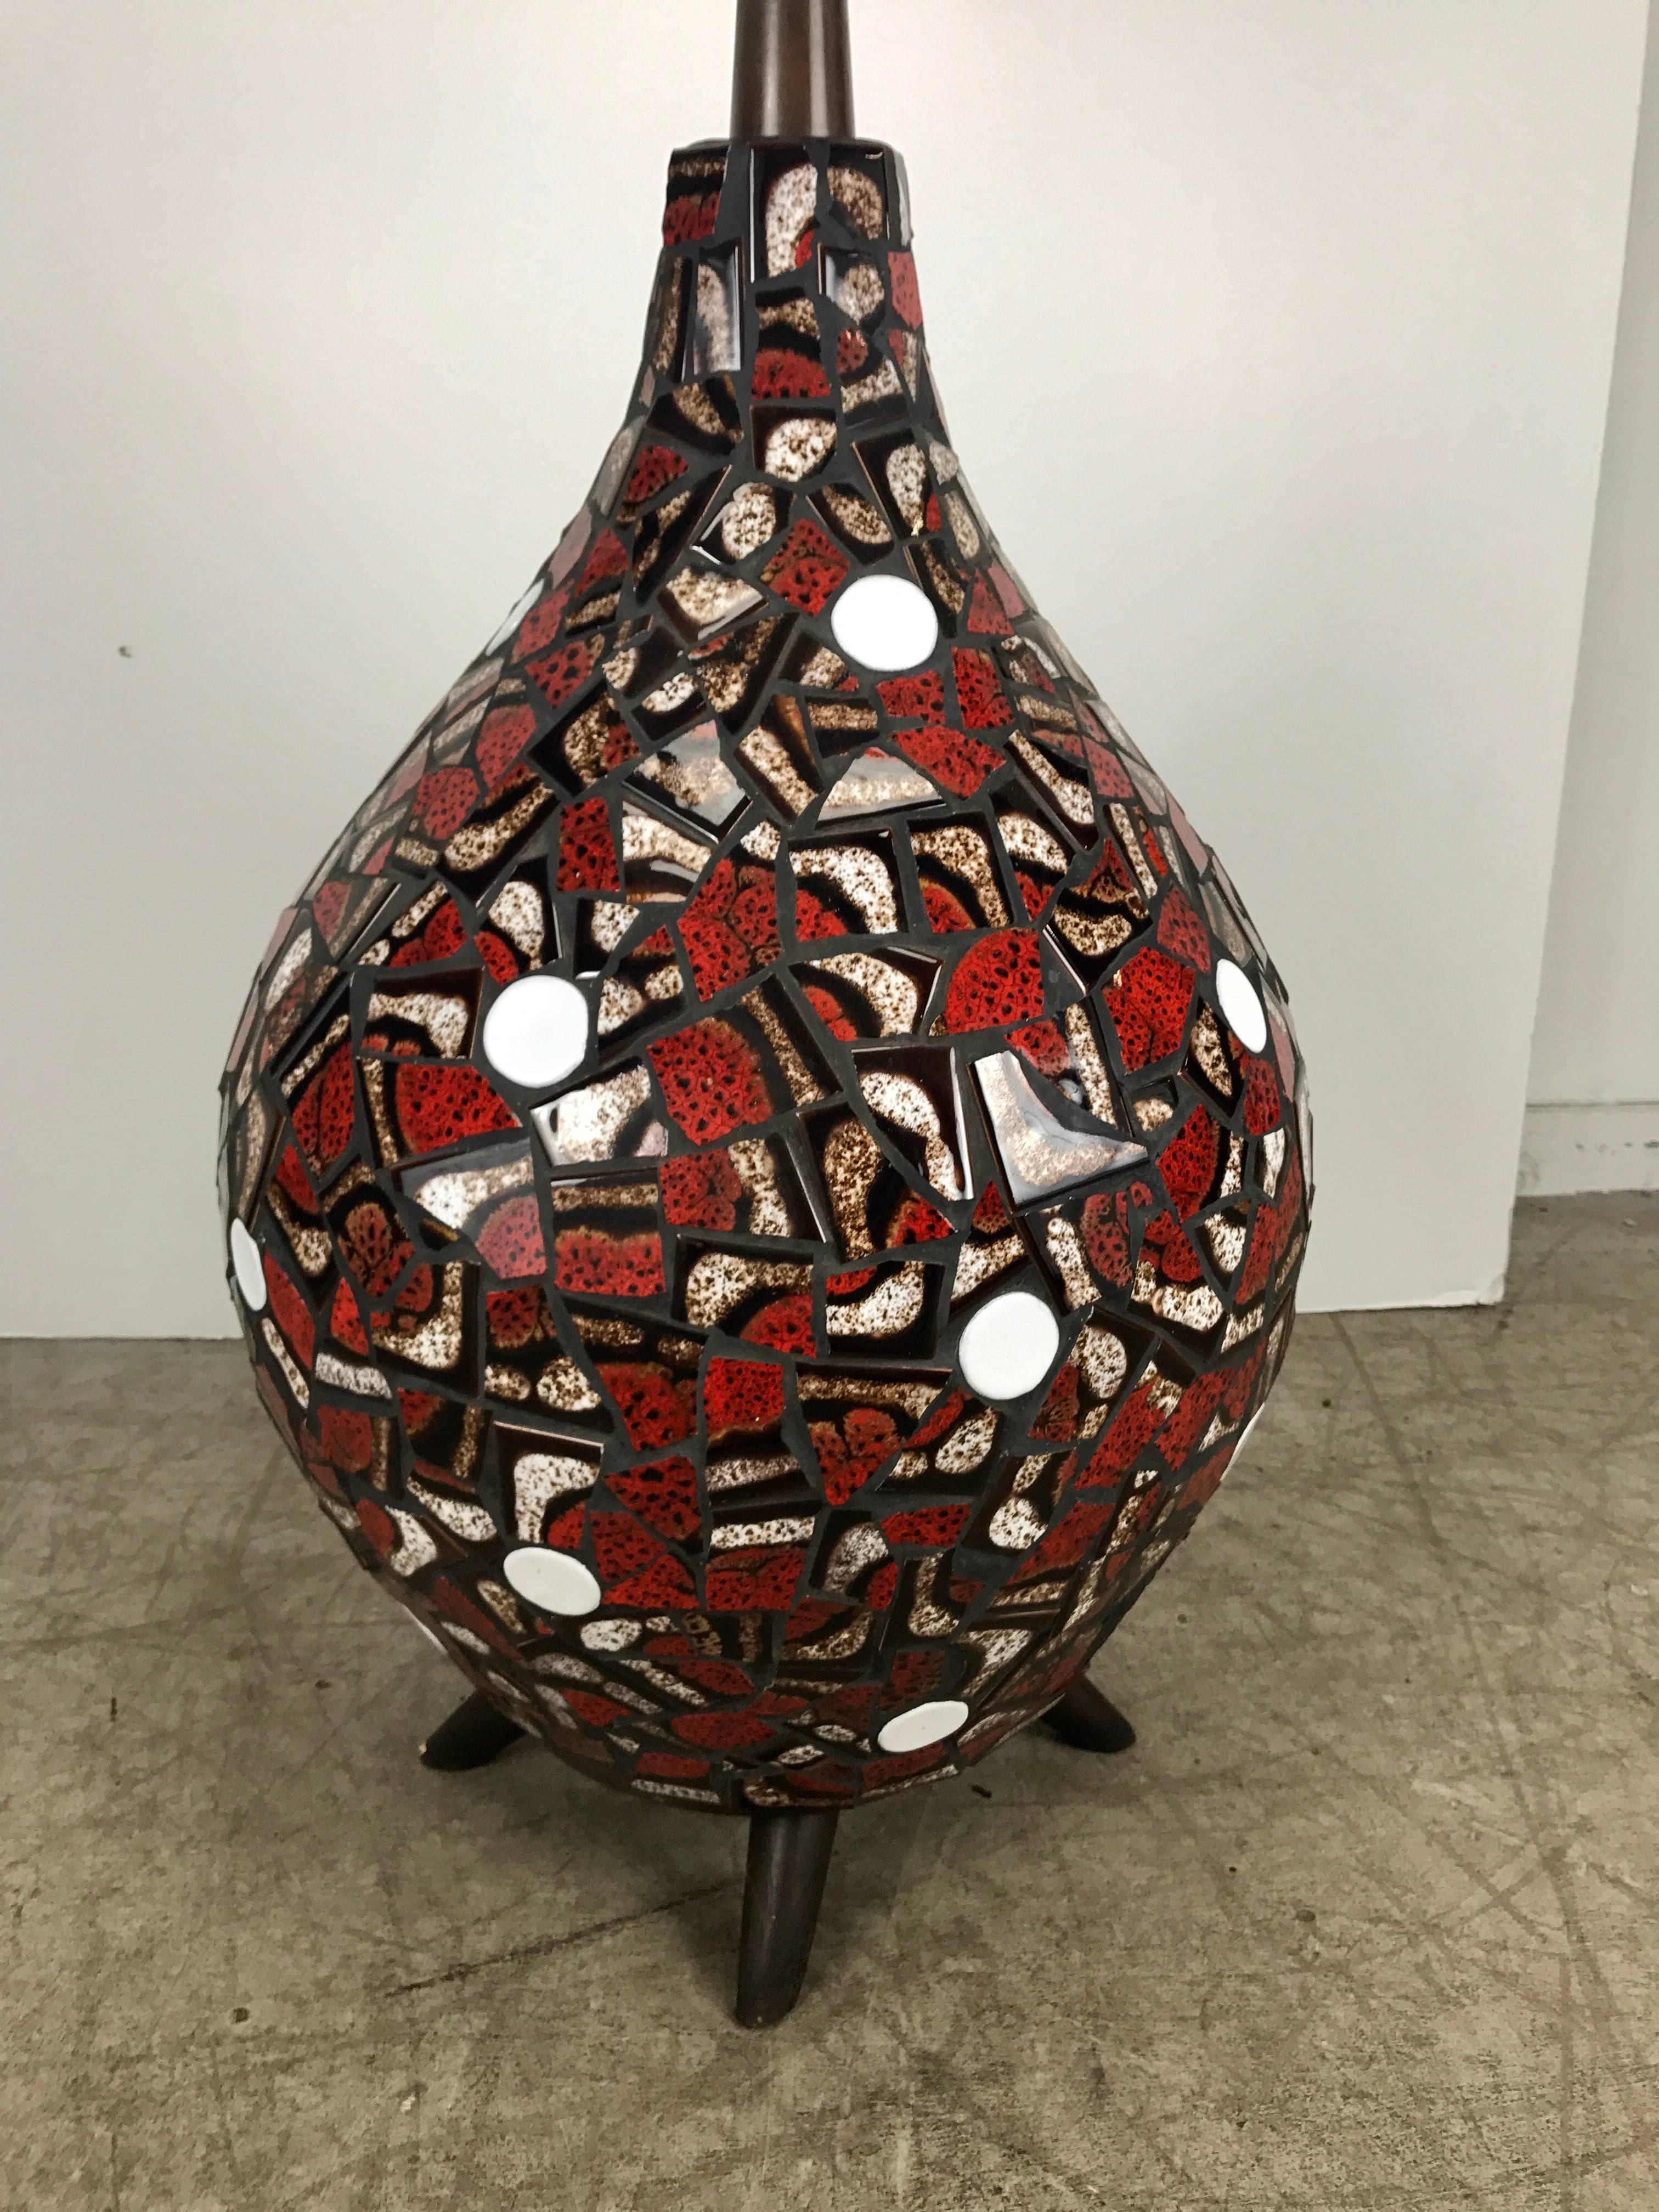 The material use is a mixture of fiberglass and wood. Here is a little background on the artist. Maurice Chalvignac was a Quebec ceramic artist who was not originally from Canada but was from France. He emigrated from France to Canada in 1957. Most